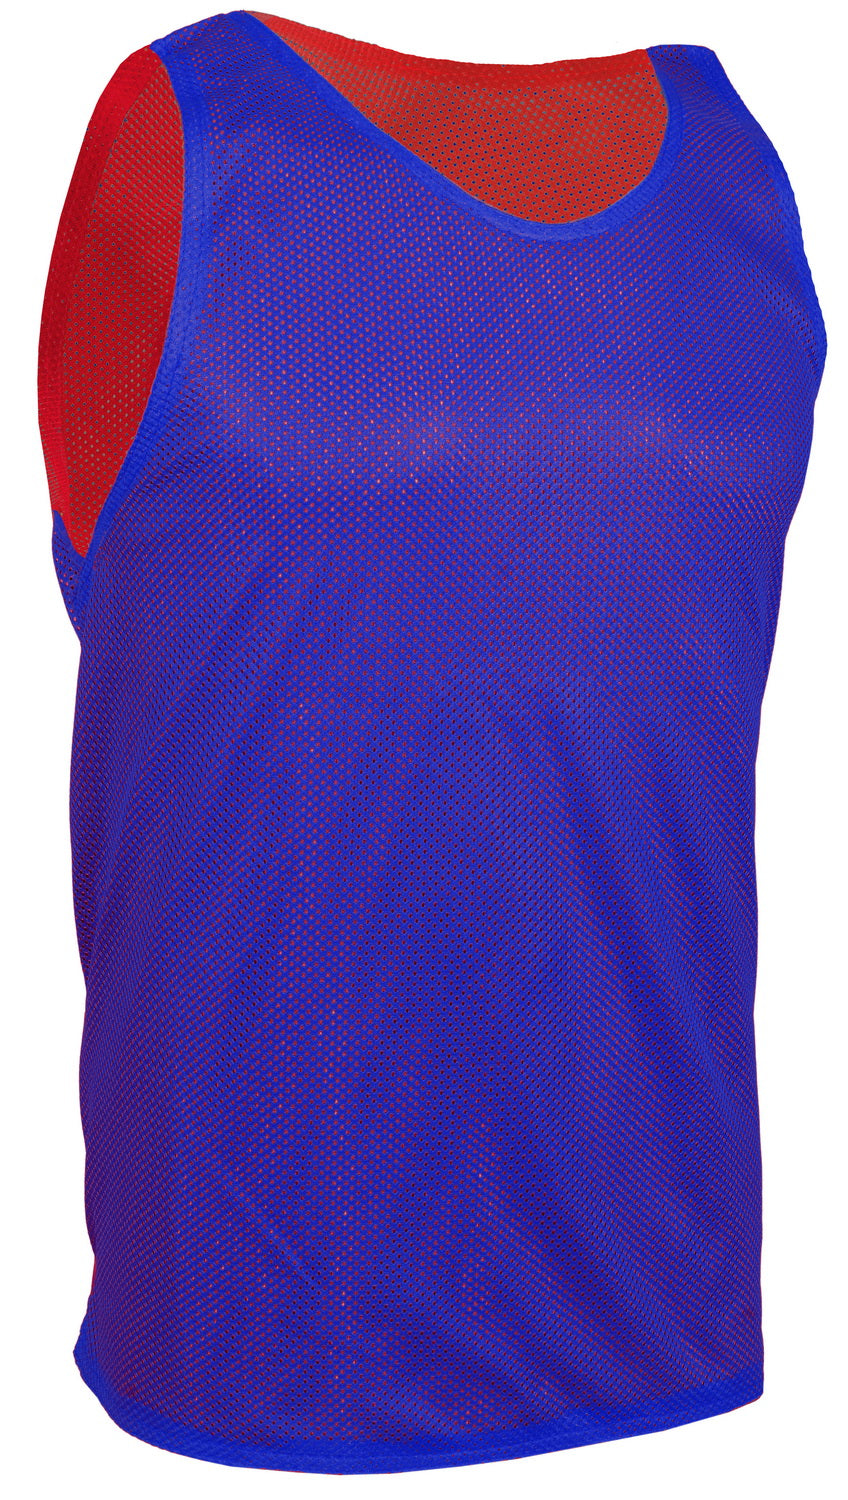 Micro Mesh Scrimmage Vests (With Options)